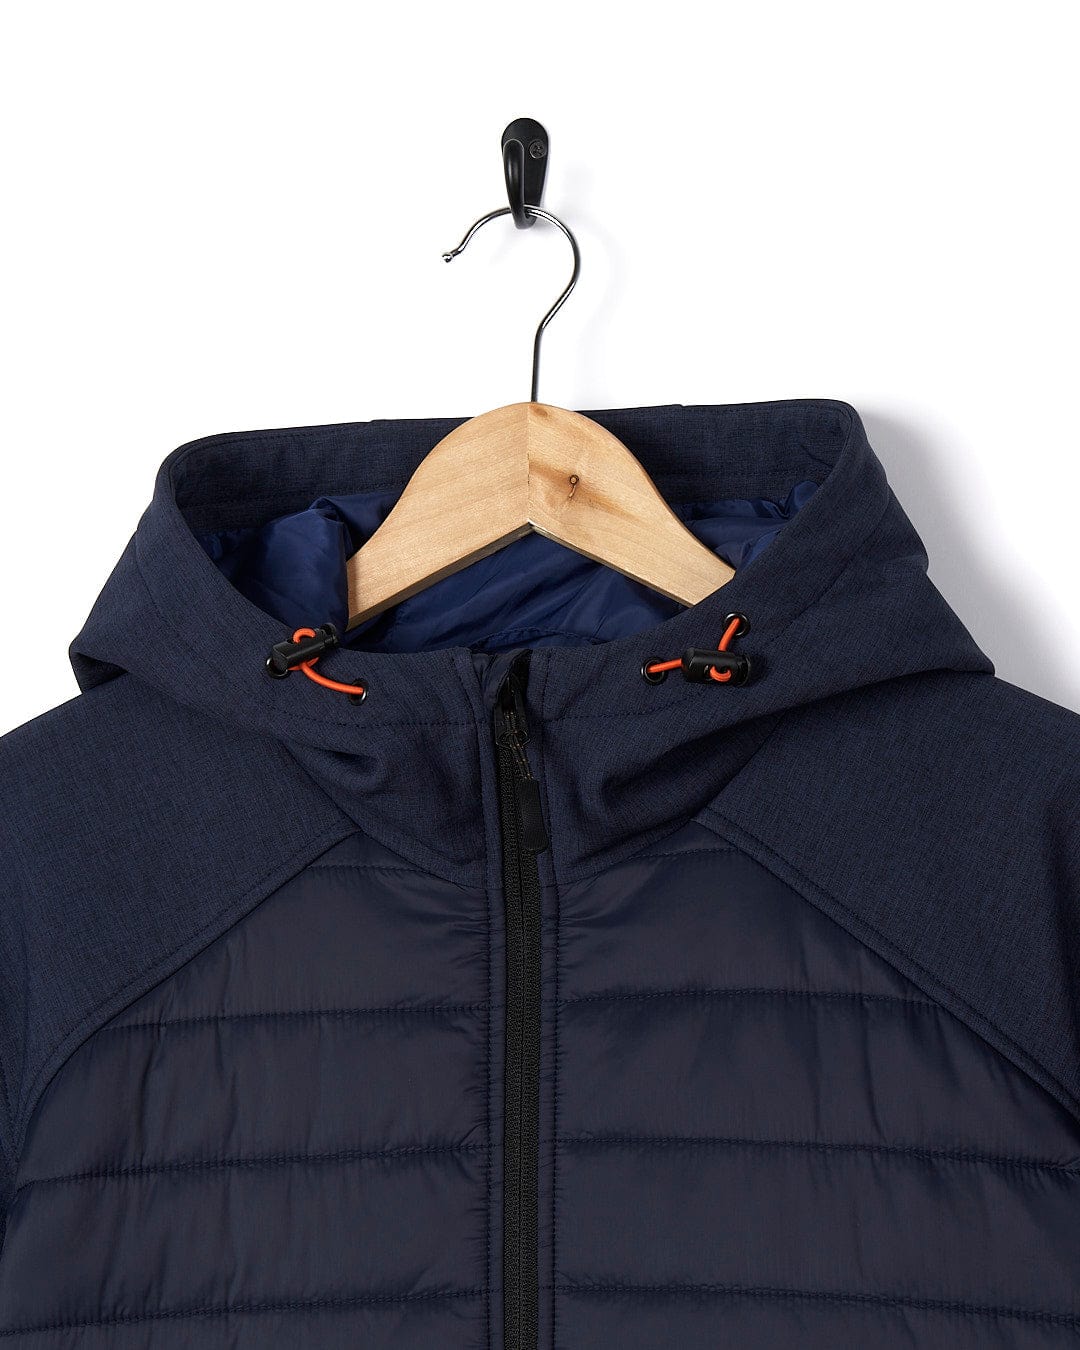 A Saltrock Purbeck Padded Jacket - Dark Blue hanging on a hanger, perfect for outdoor adventures.